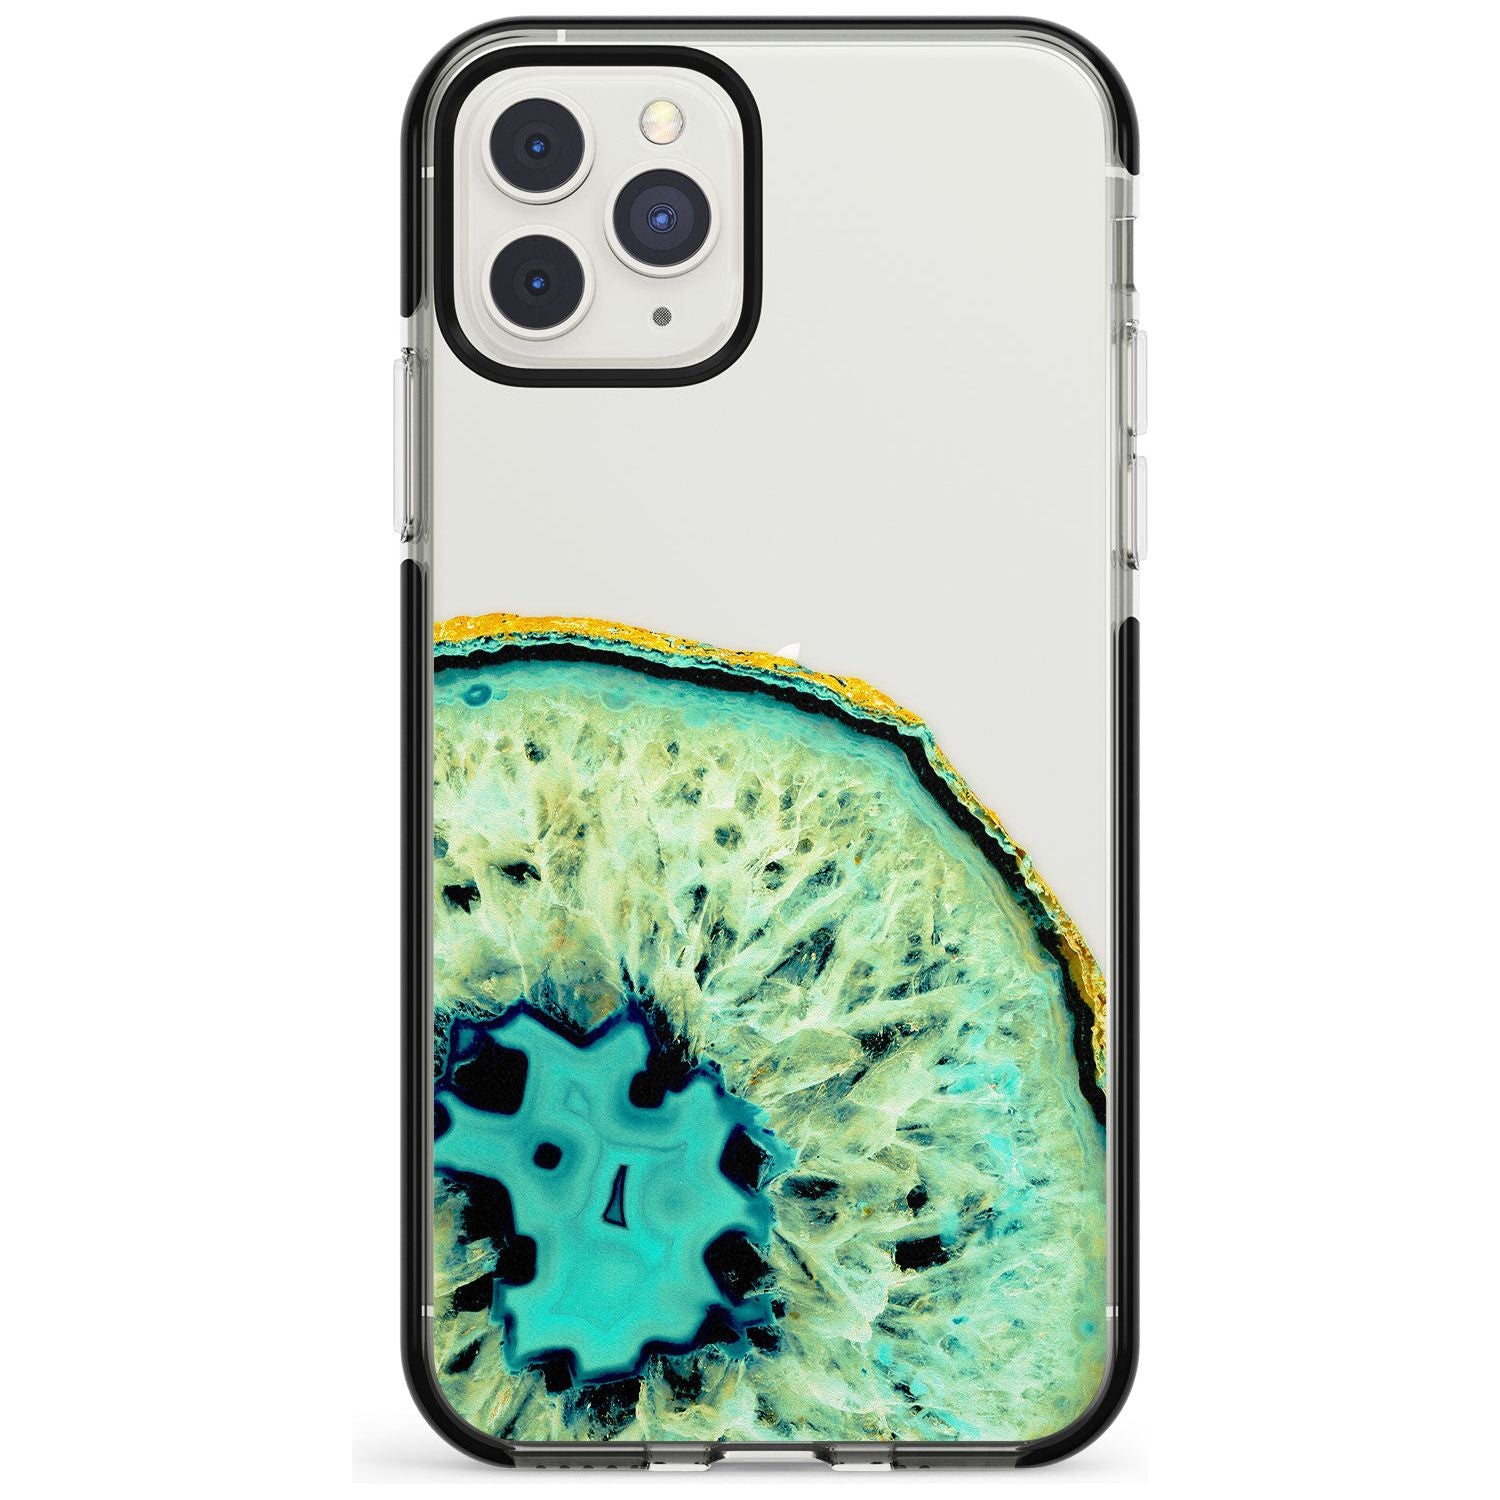 Turquoise & Green Gemstone Crystal Clear Design Black Impact Phone Case for iPhone 11 Pro Max